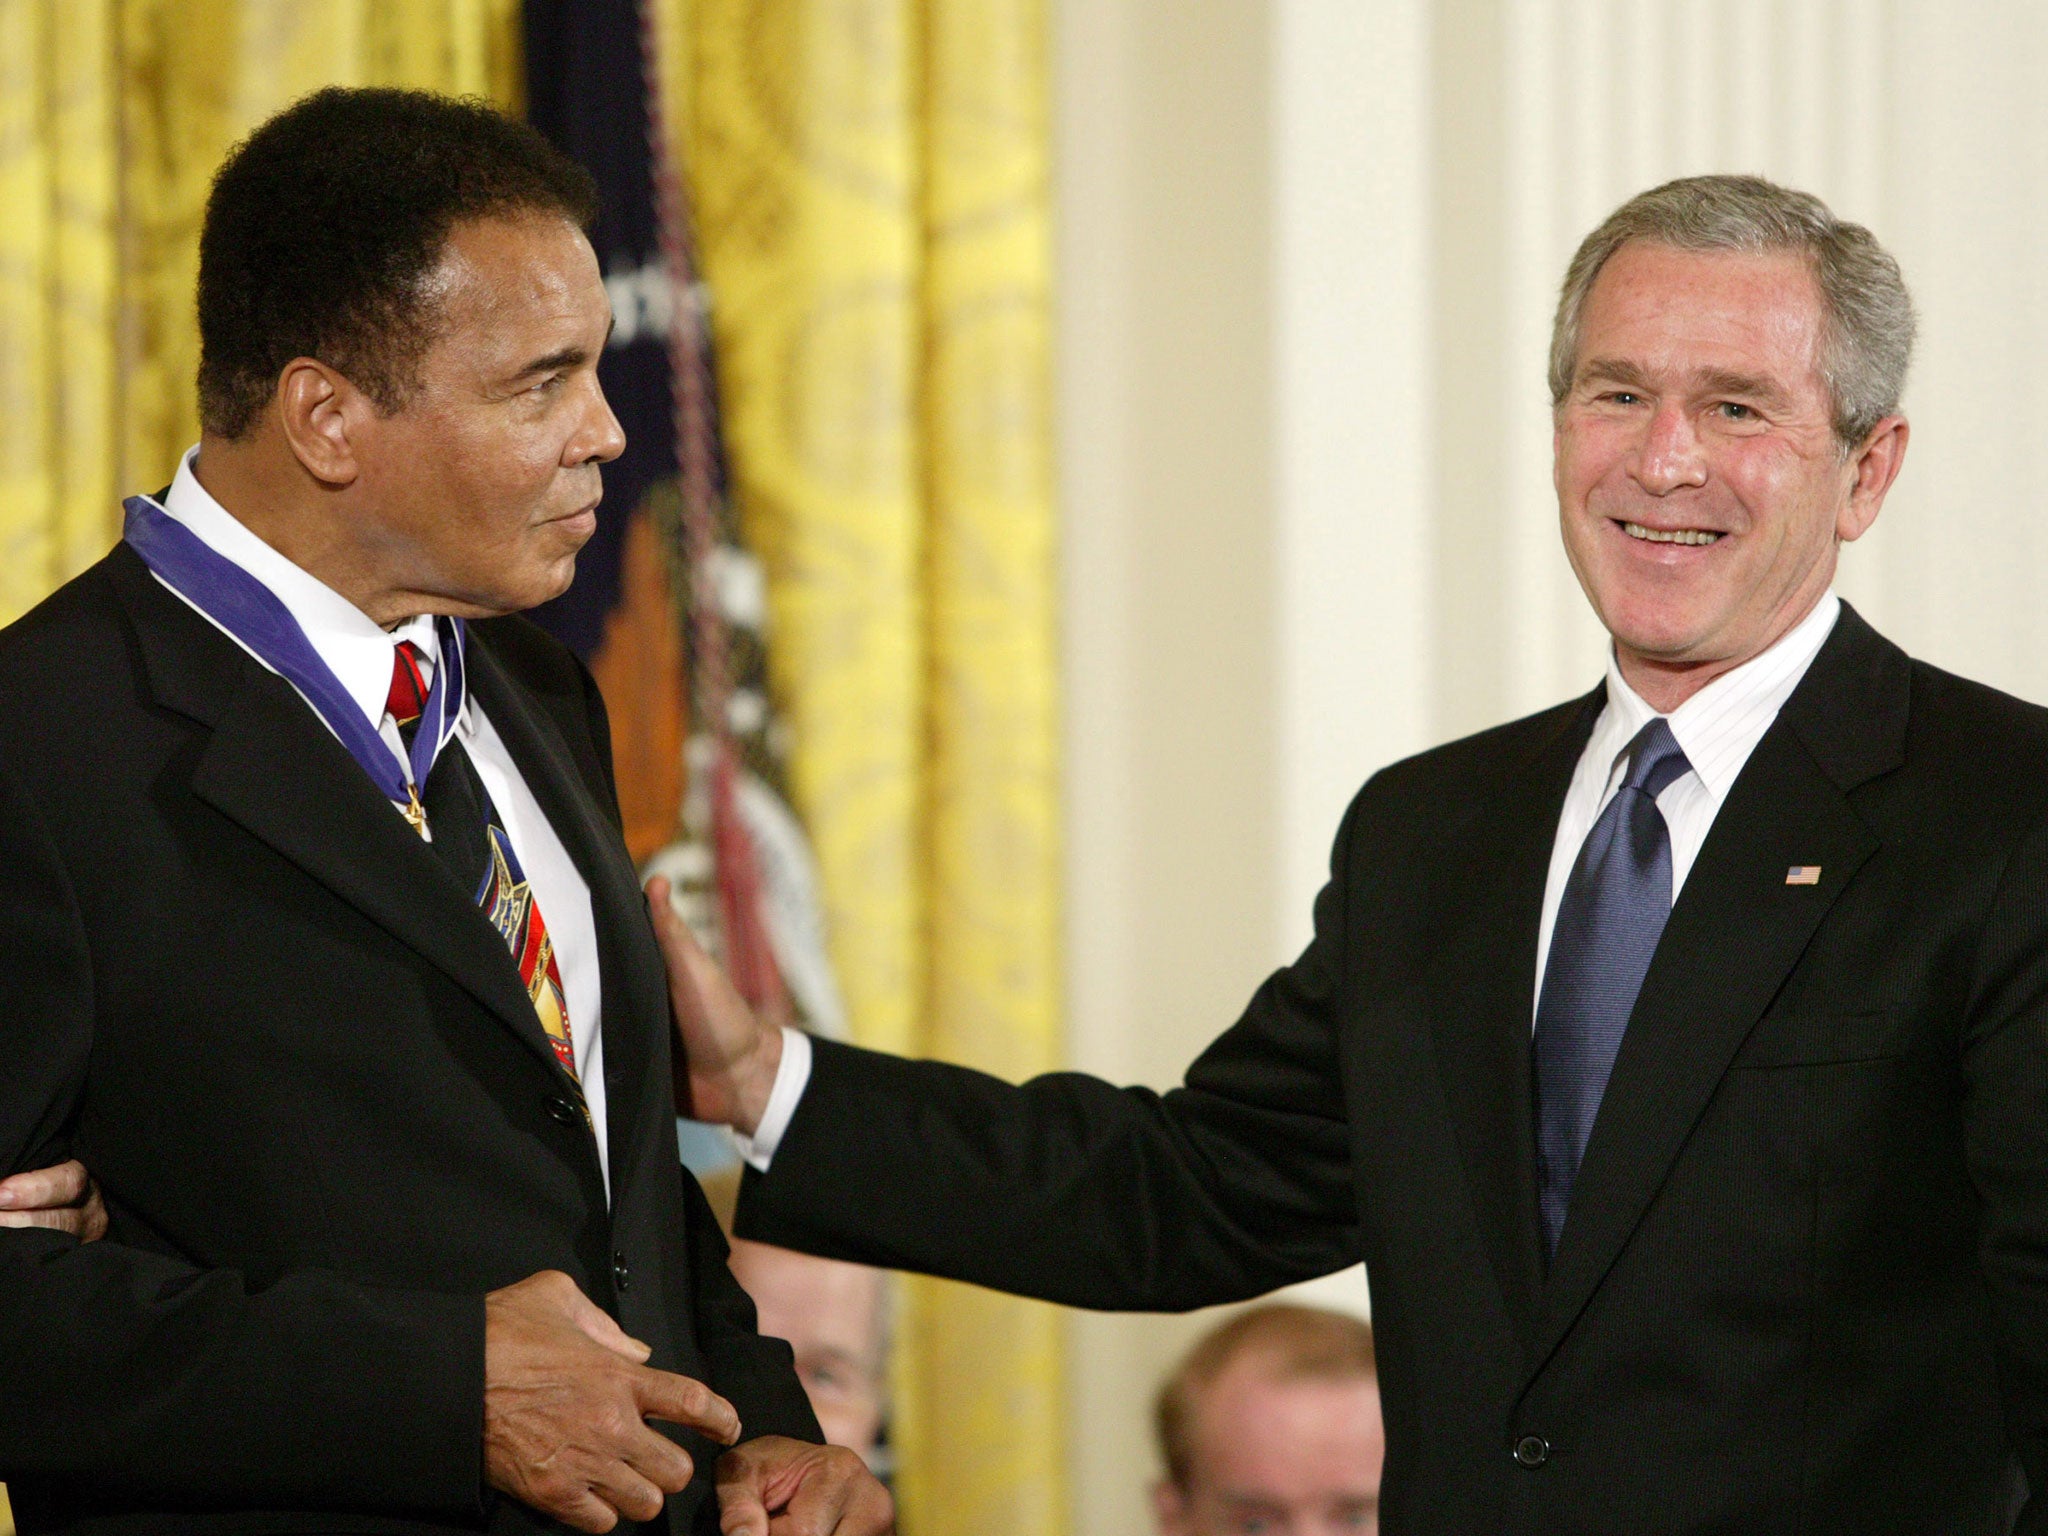 Muhammad Ali and President George W. Bush at the Freedom Awards Ceremony at the White House in Washington D.C. on November 9, 2005